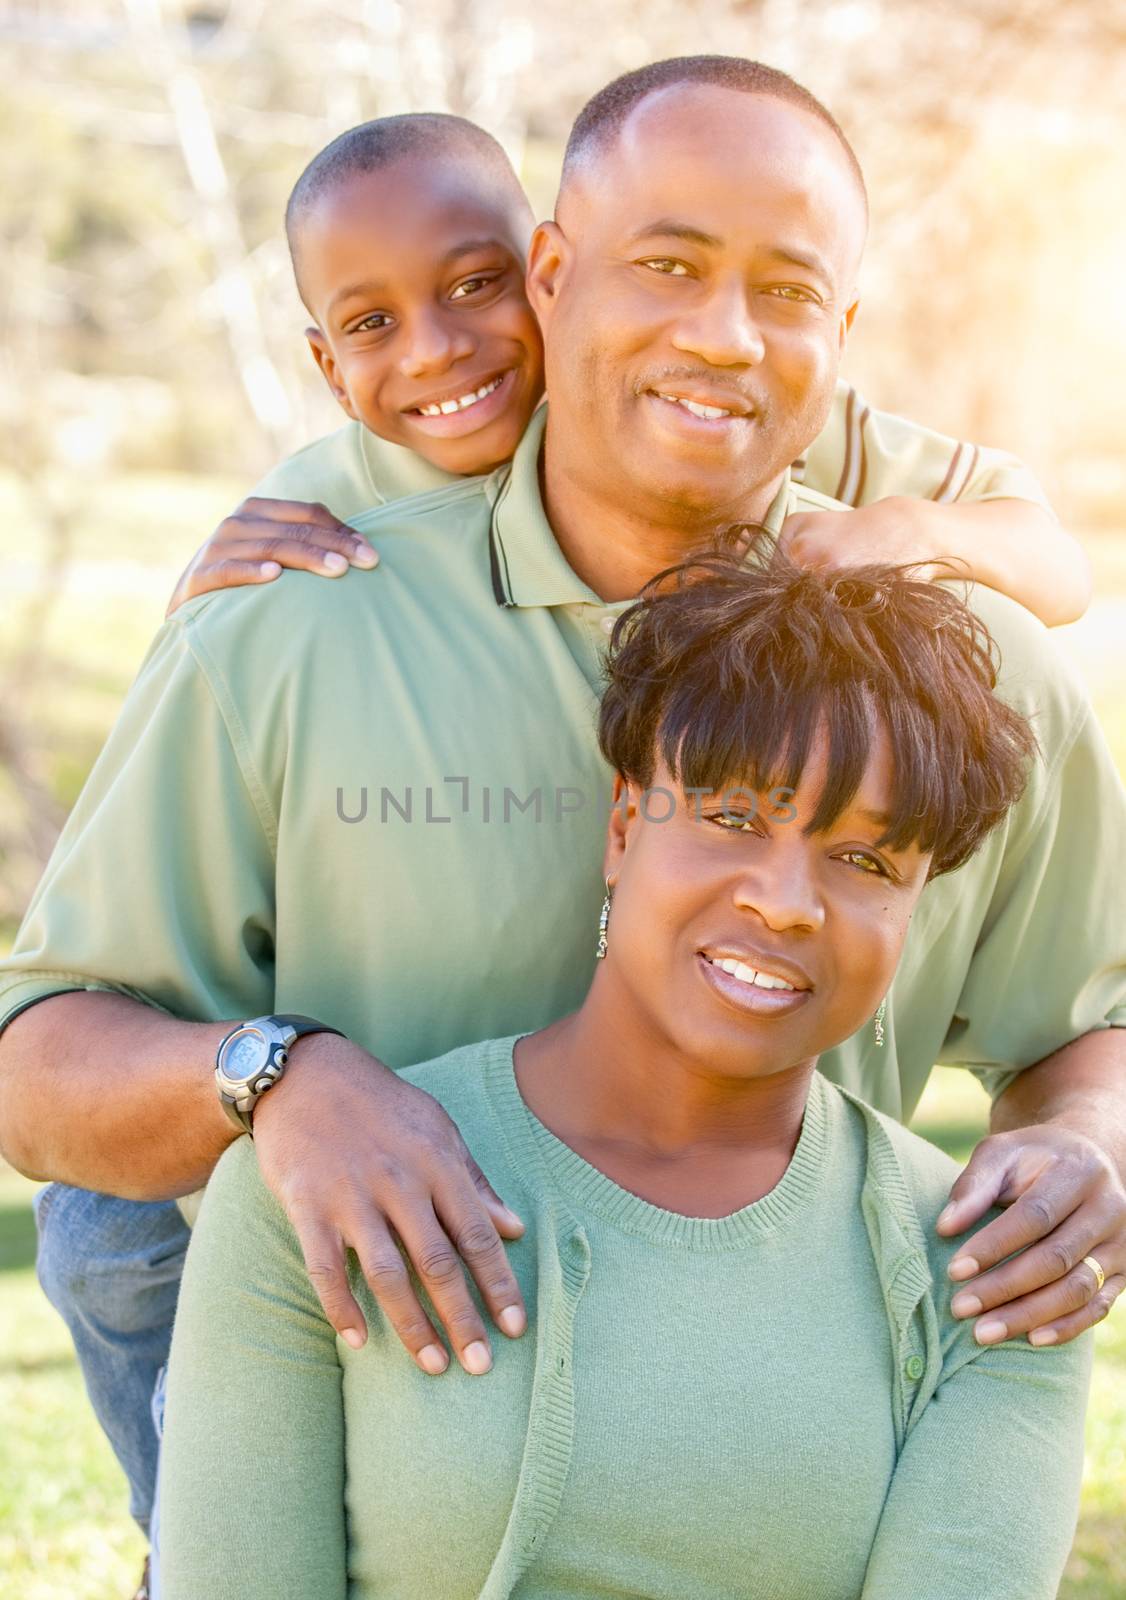 Beautiful Happy African American Family Portrait Outdoors by Feverpitched